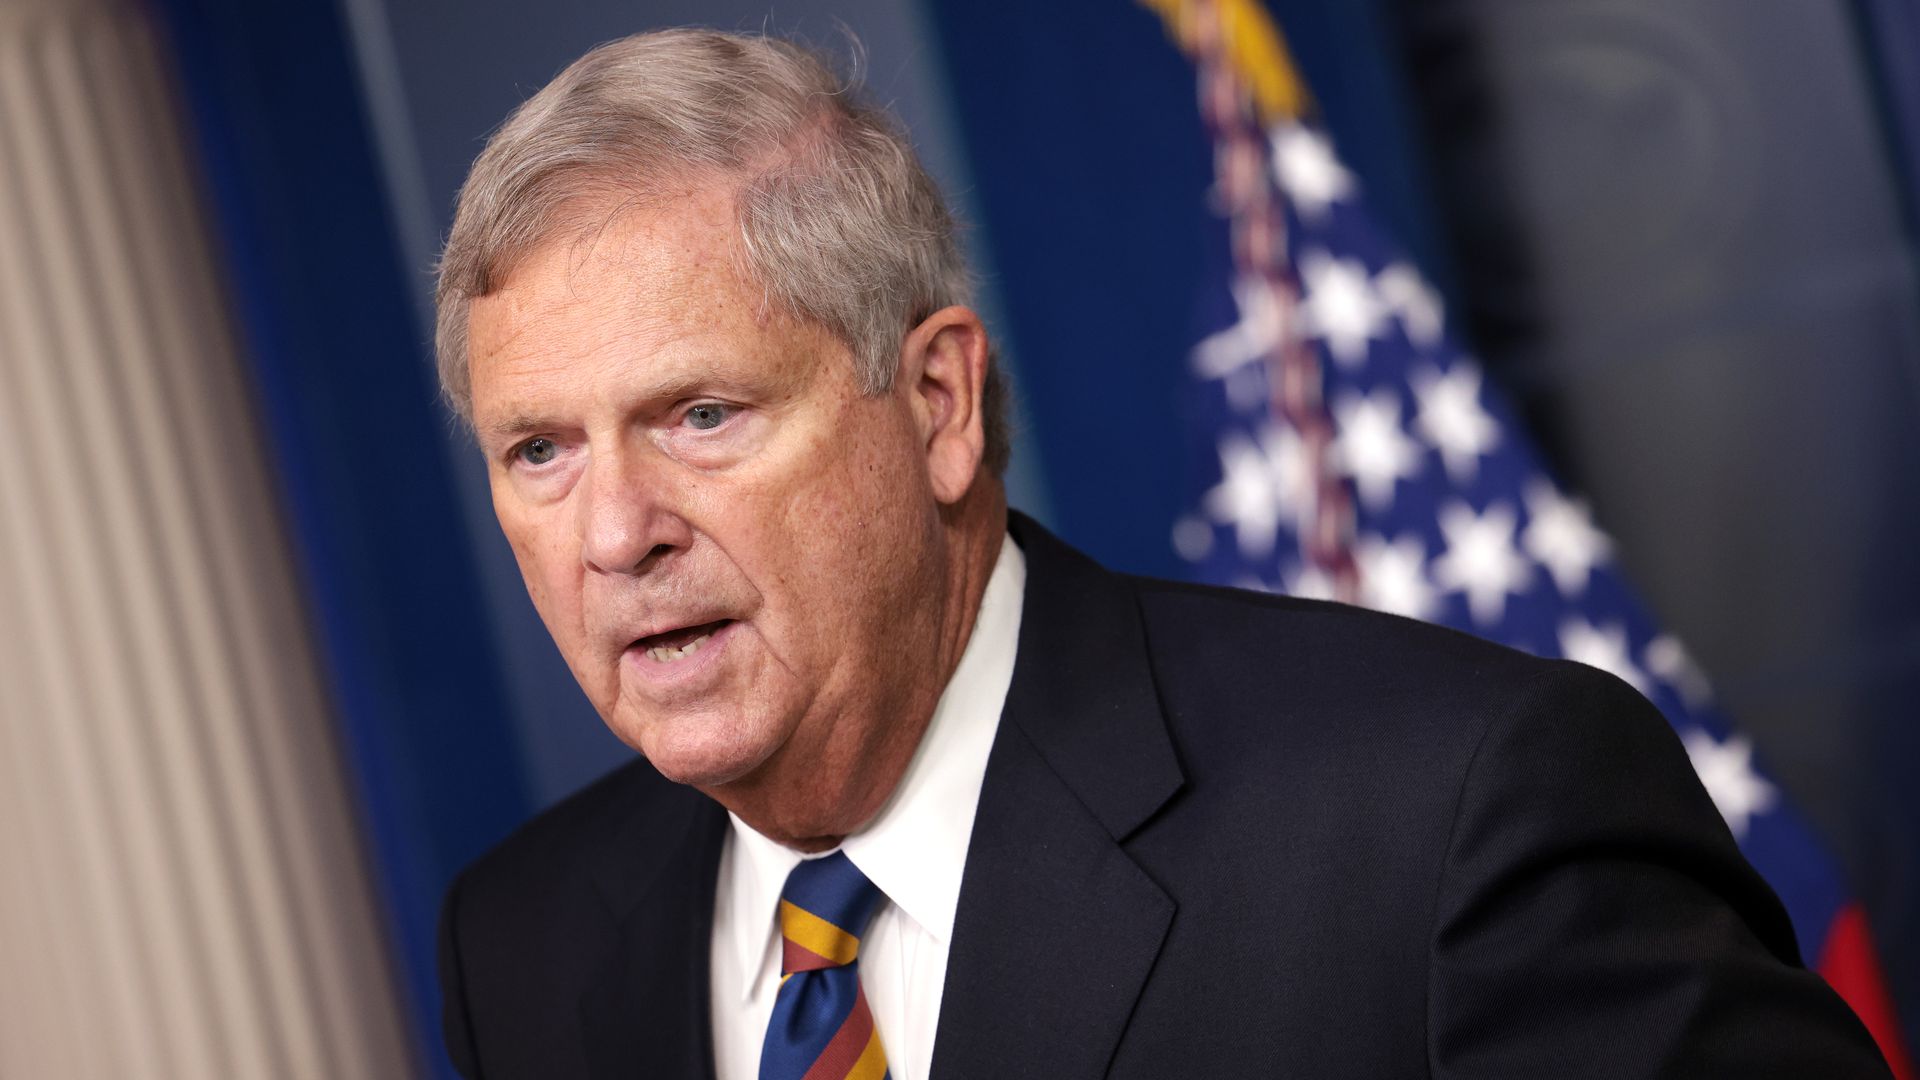 Agriculture Secretary Tom Vilsack speaks on rising food prices at the White House on September 08, 2021; Photo: Kevin Dietsch/Getty Images